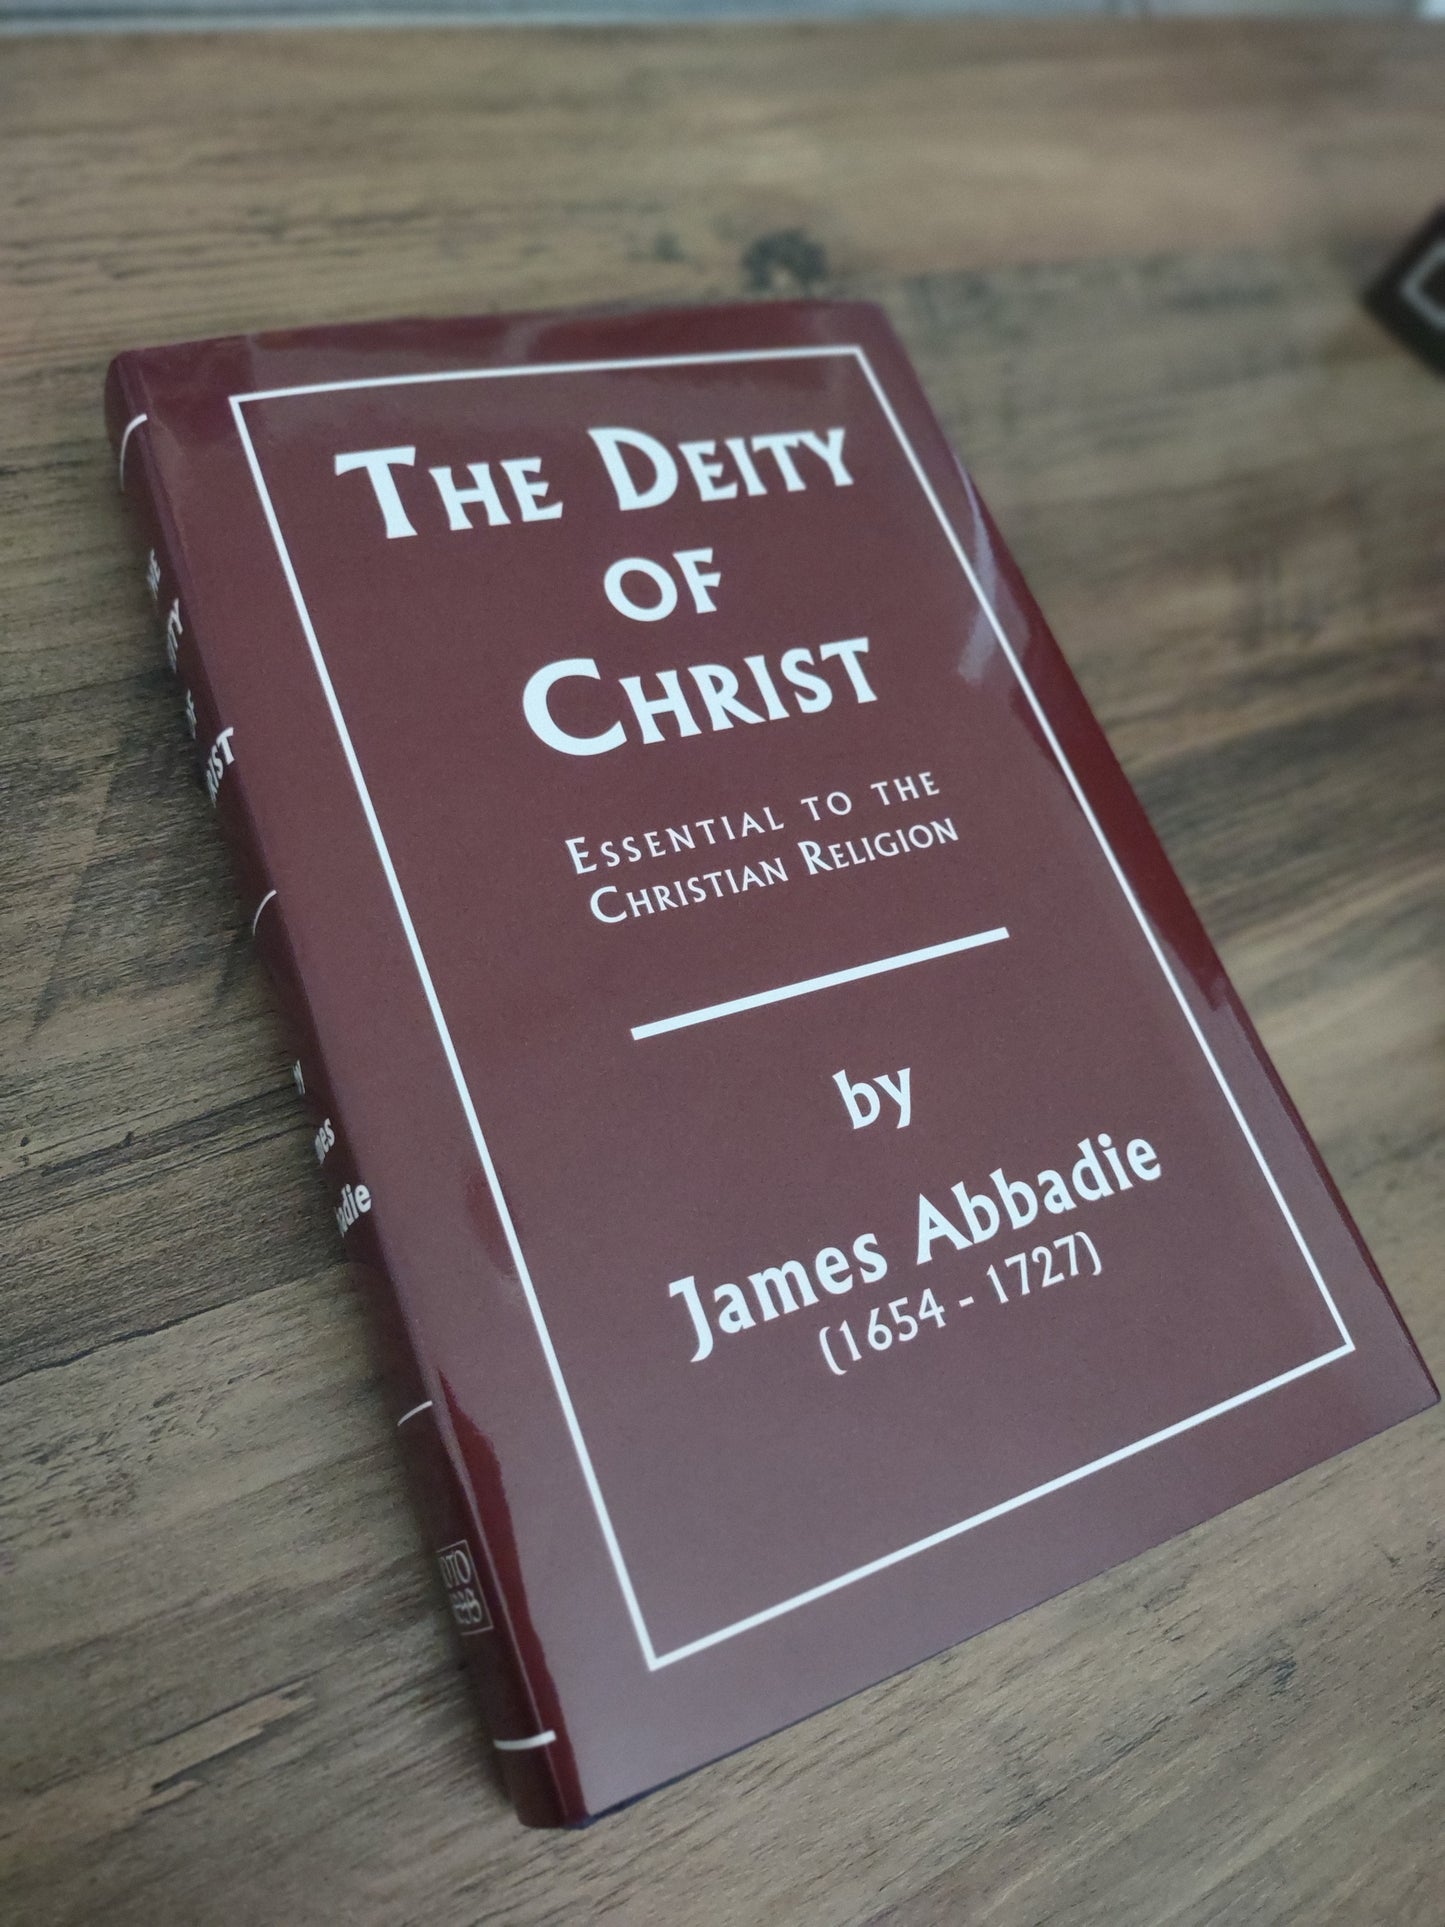 The Deity of Christ by James Abbadie